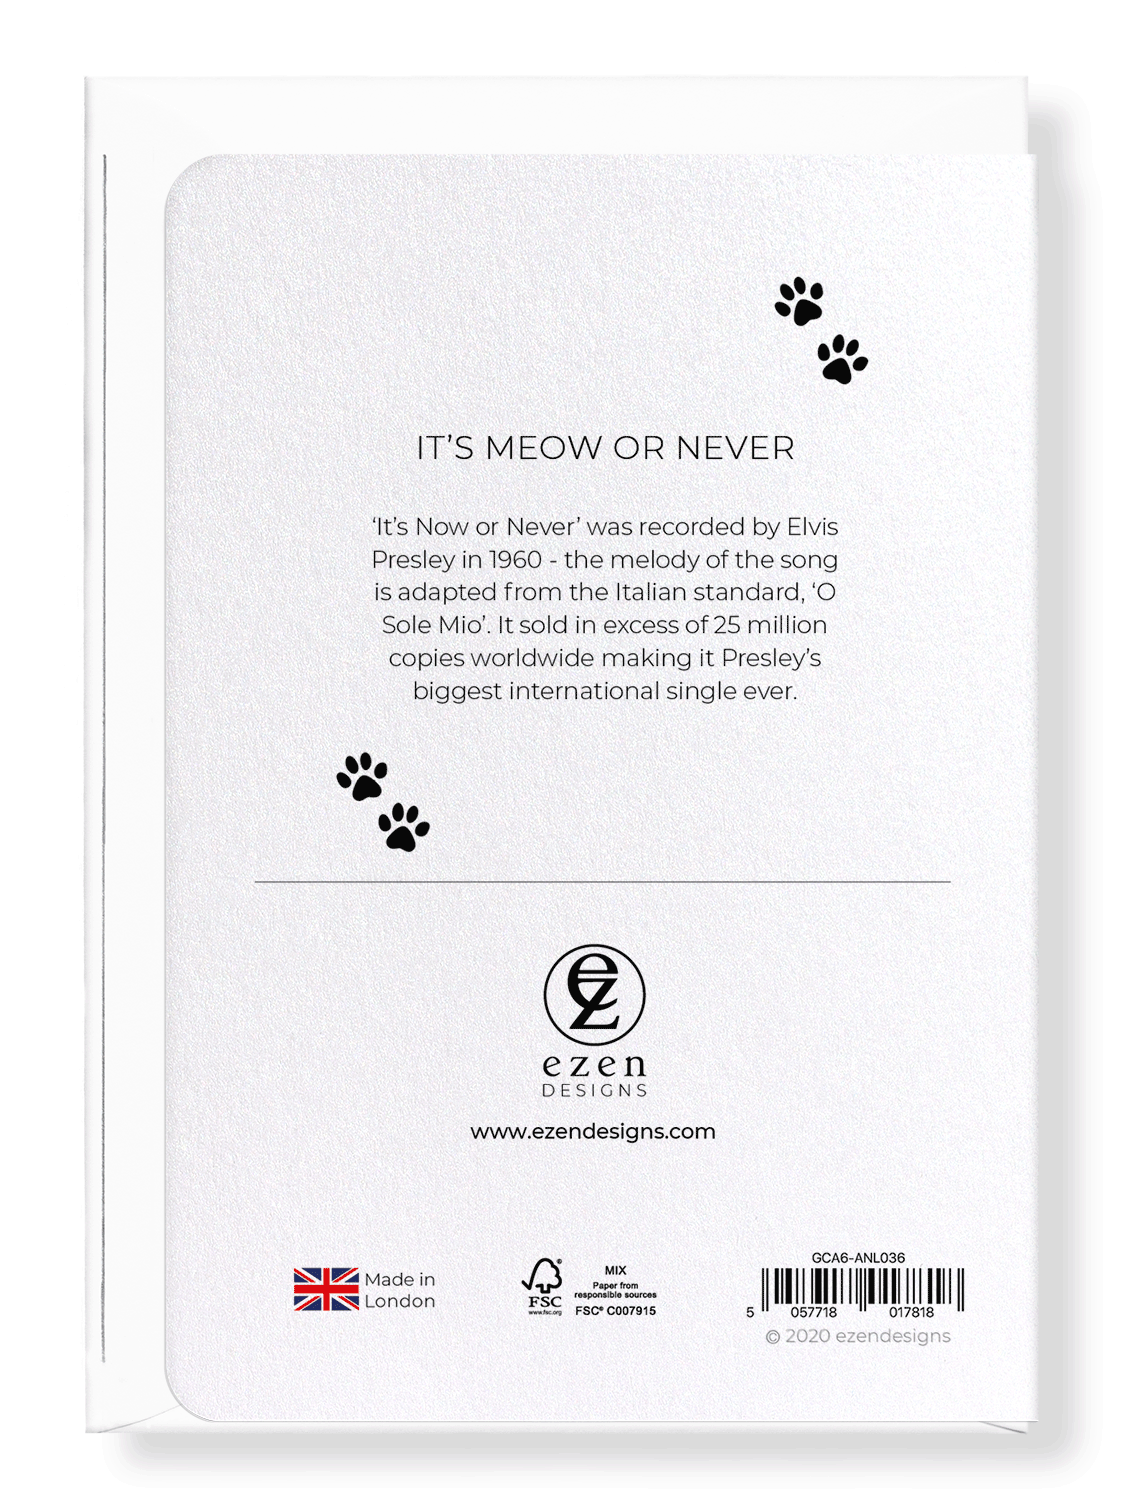 Ezen Designs - It's meow or never - Greeting Card - Back